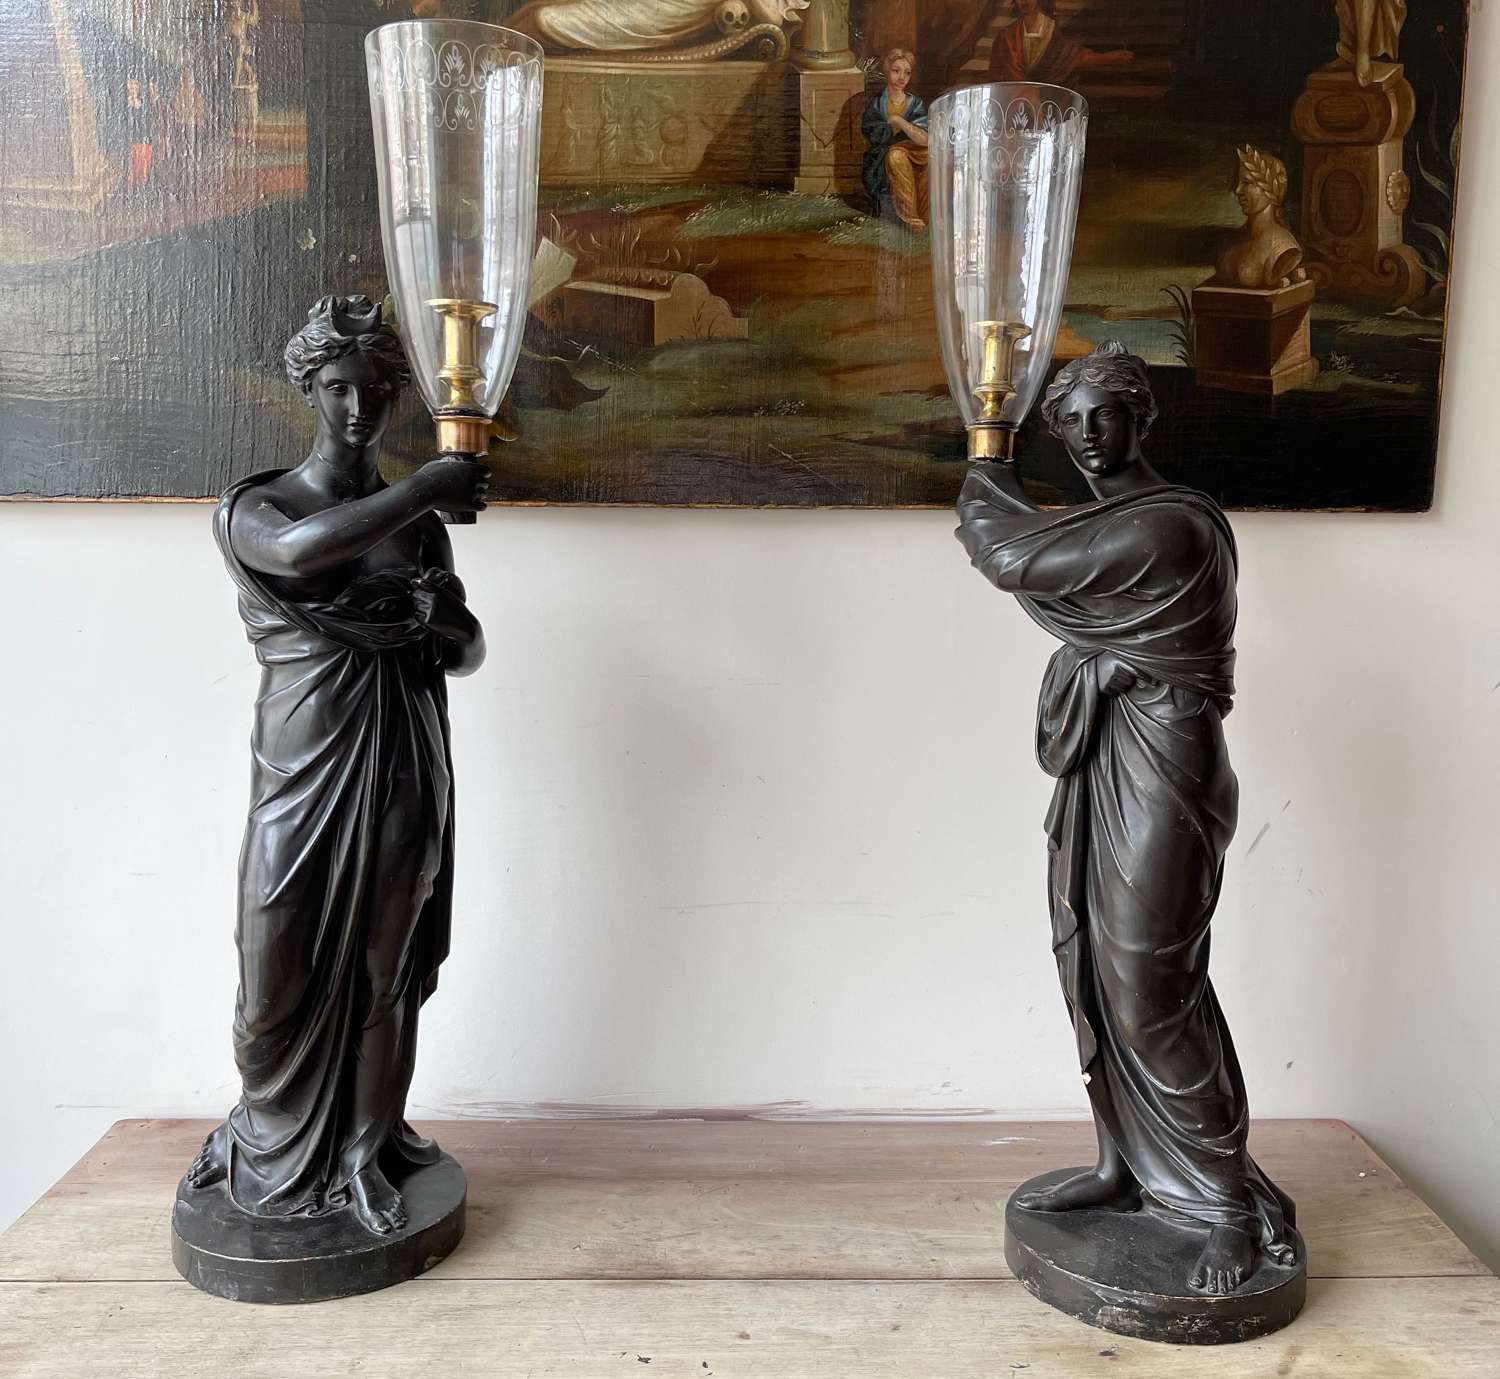 A pair of figural lamps by Hopper.